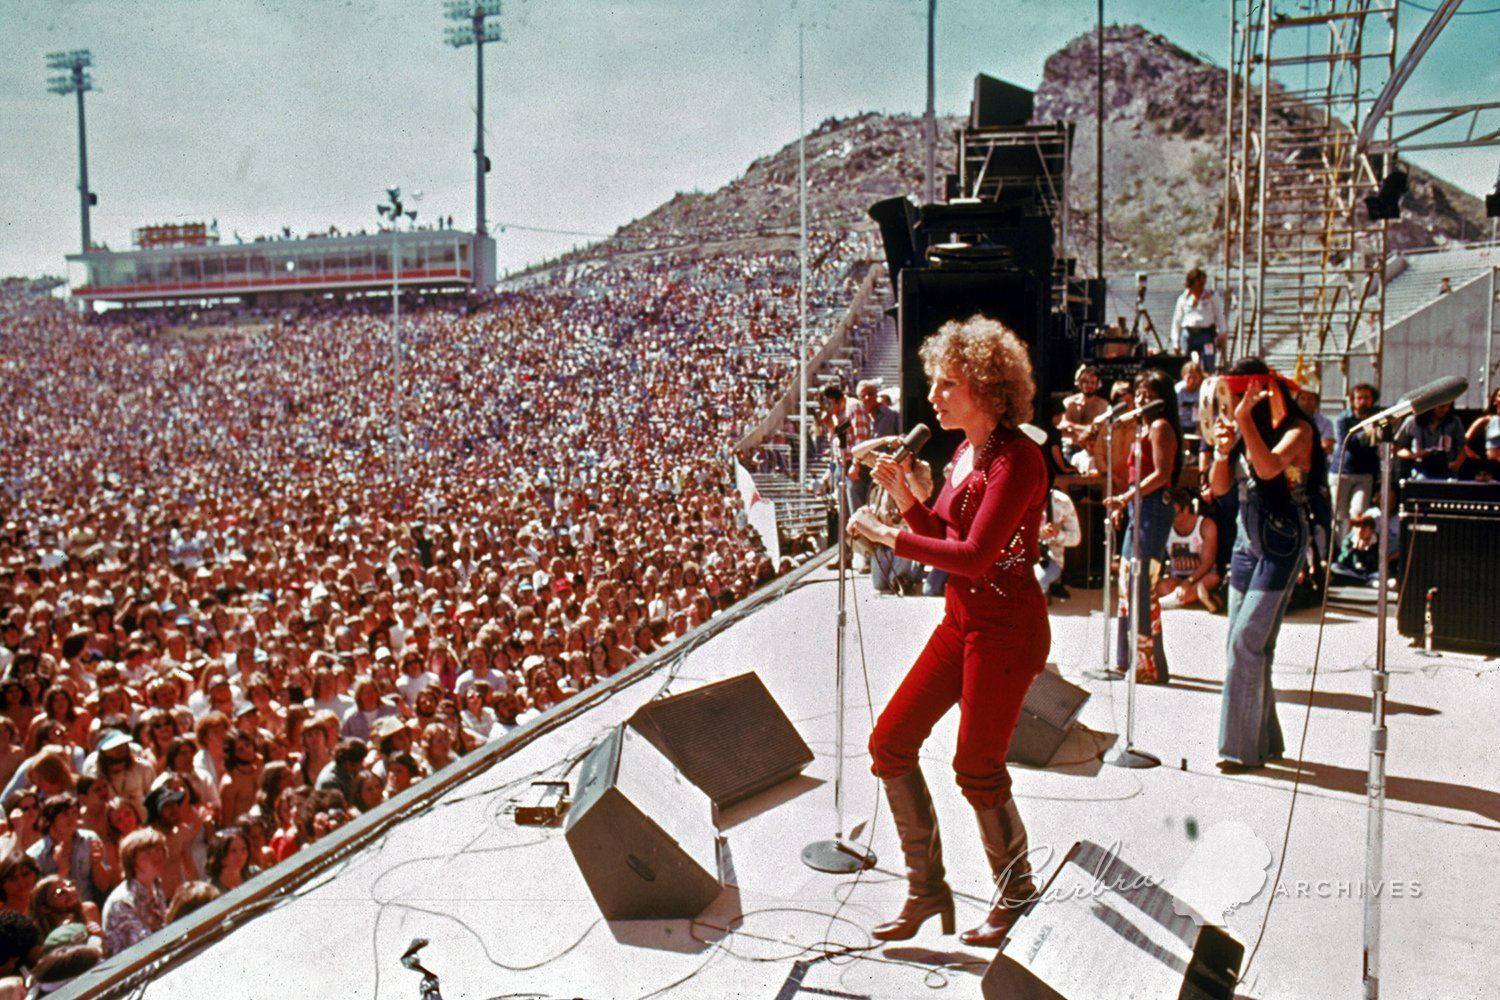 Barbra Streisand on stage in front of thousands of people at Sun Devil Stadium, Arizona.